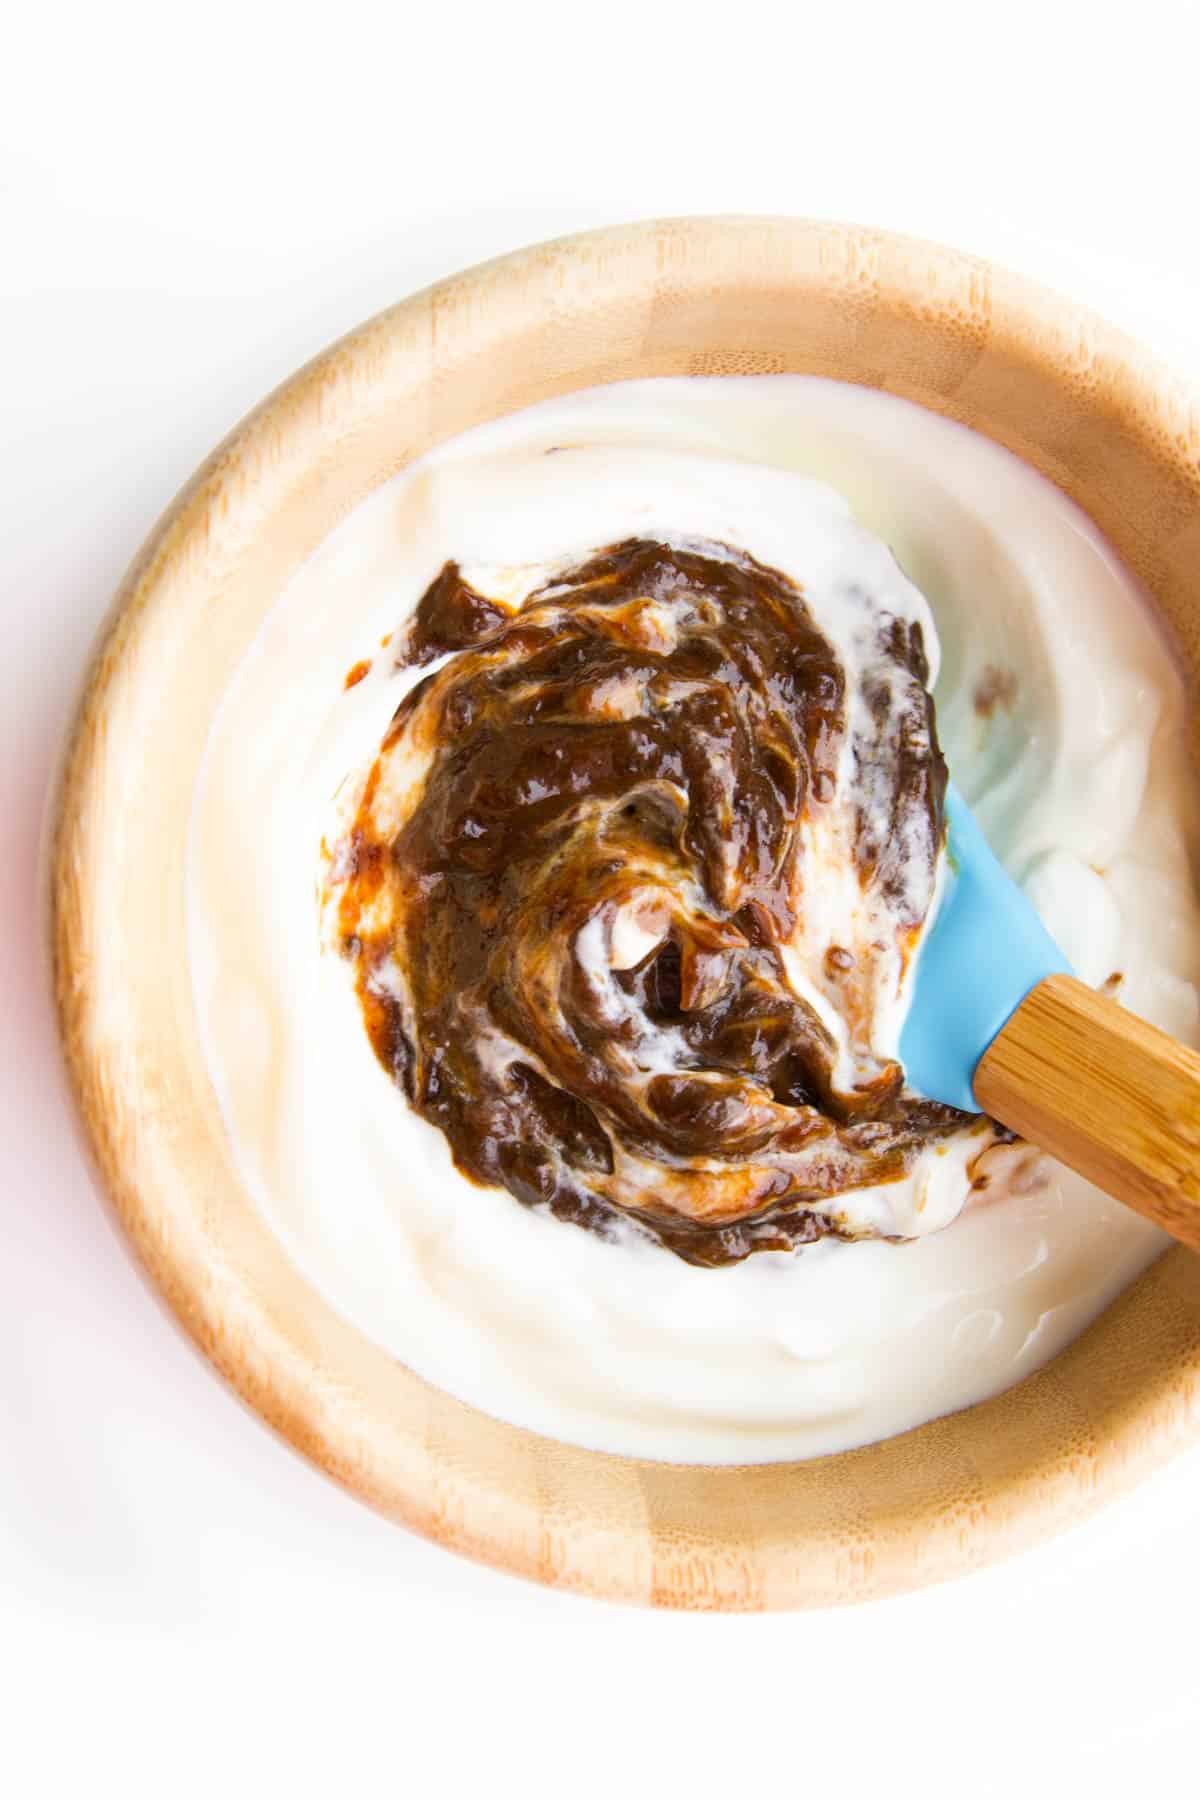 Wooden Bowl Filled With Greek Yogurt Topped With Prune Puree.